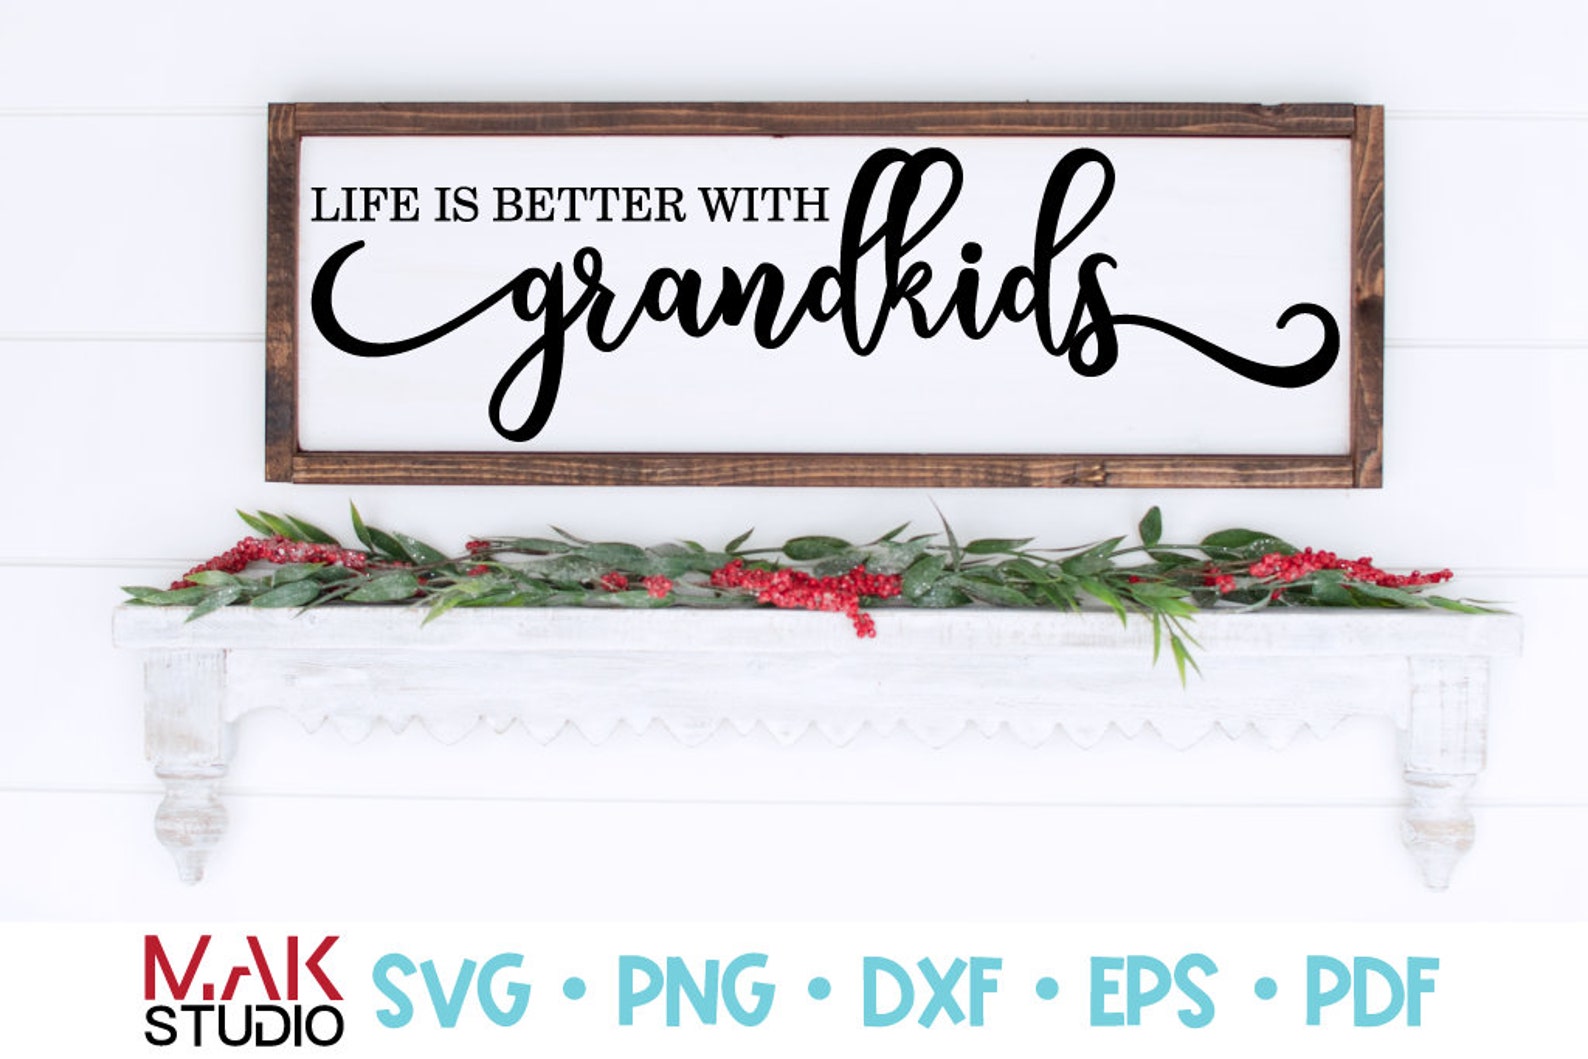 Life is better with grandkids svg Life is better with | Etsy